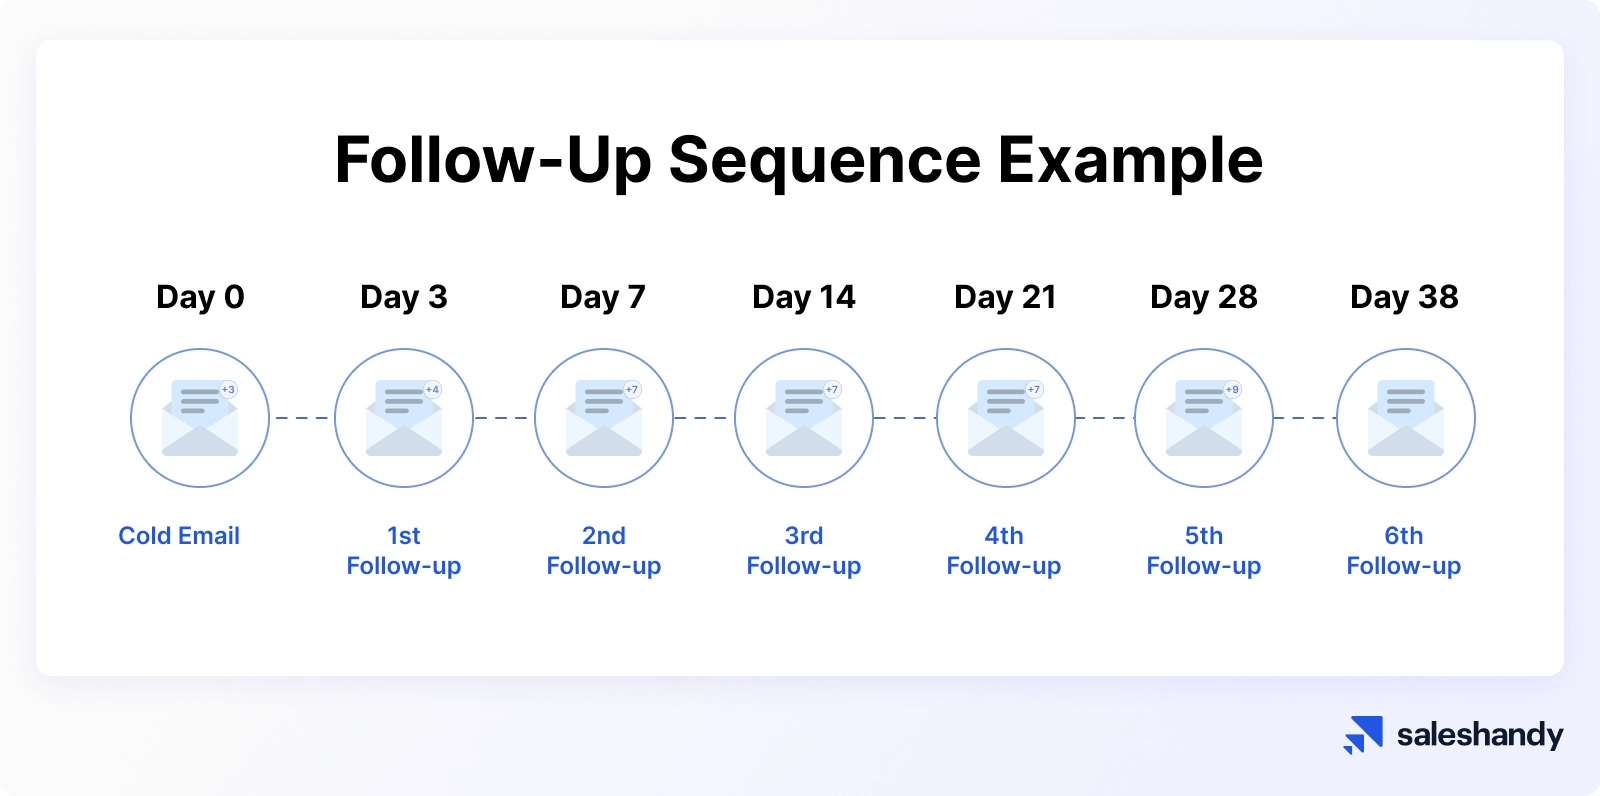 <div>How to Build a Sales Sequence: A Guide With Tips, Best Practices & More</div>